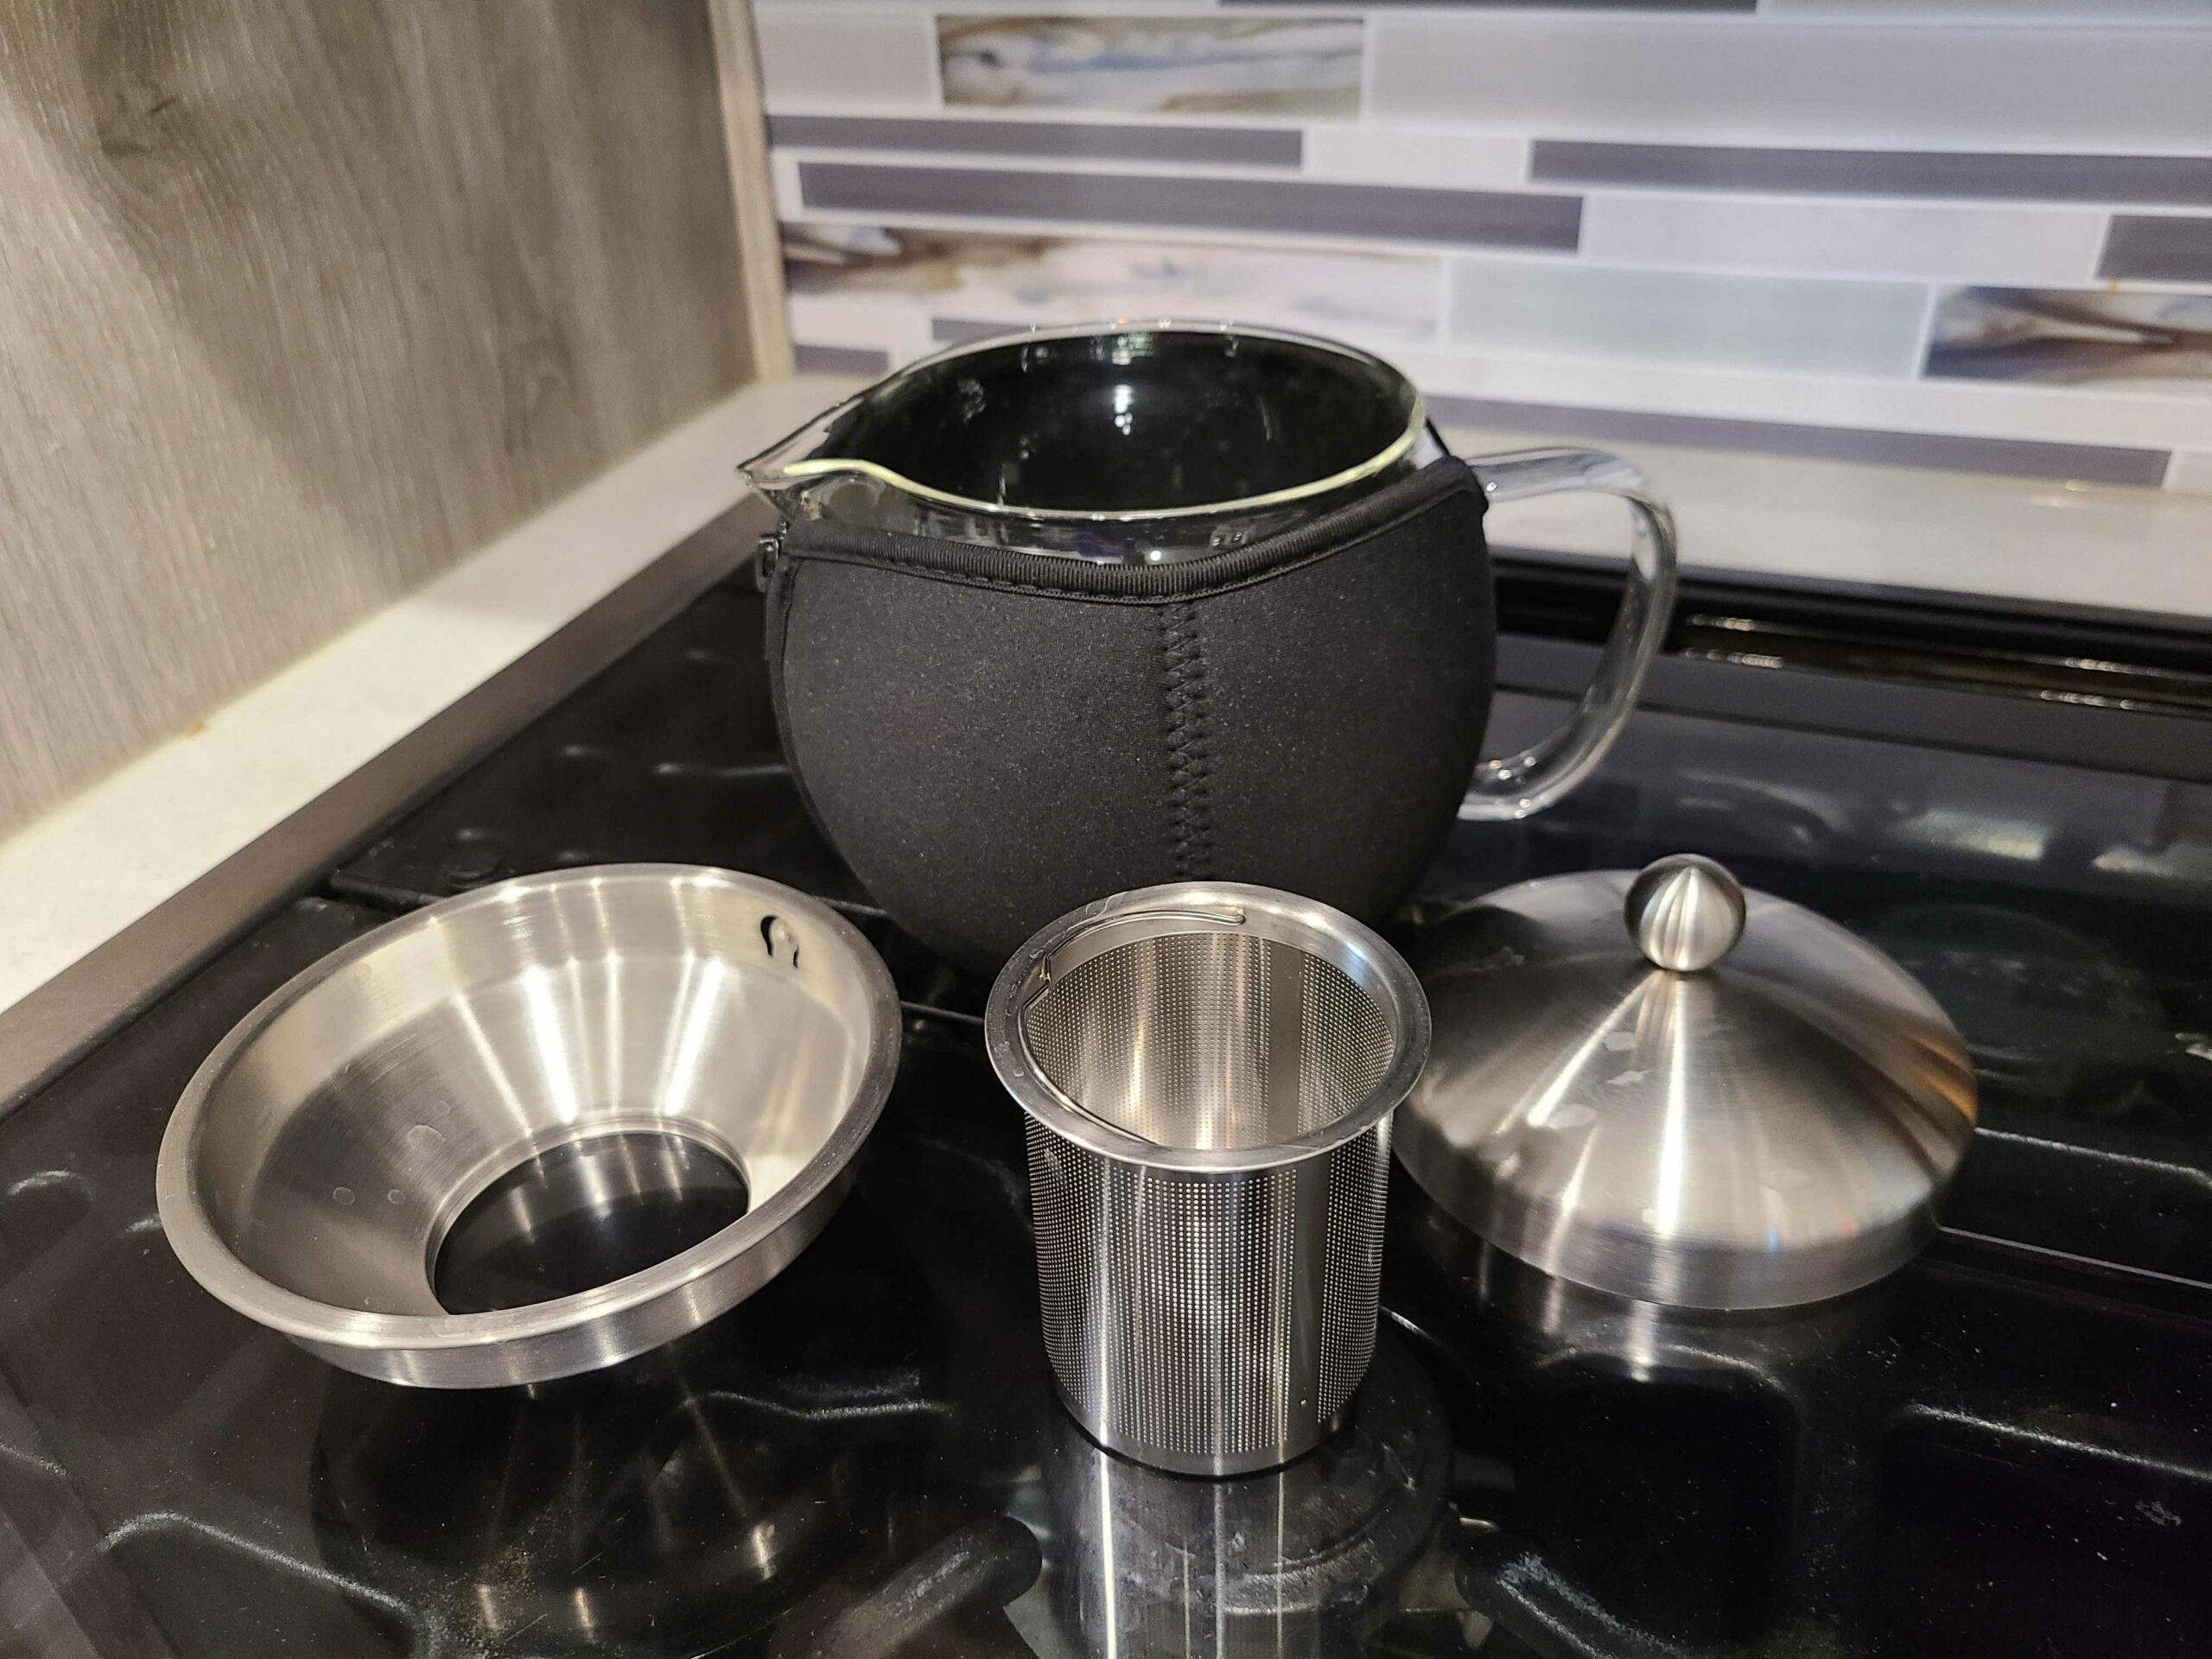 Willow and Everett Glass tea kettle infuser on stove shown with accessories taken apart